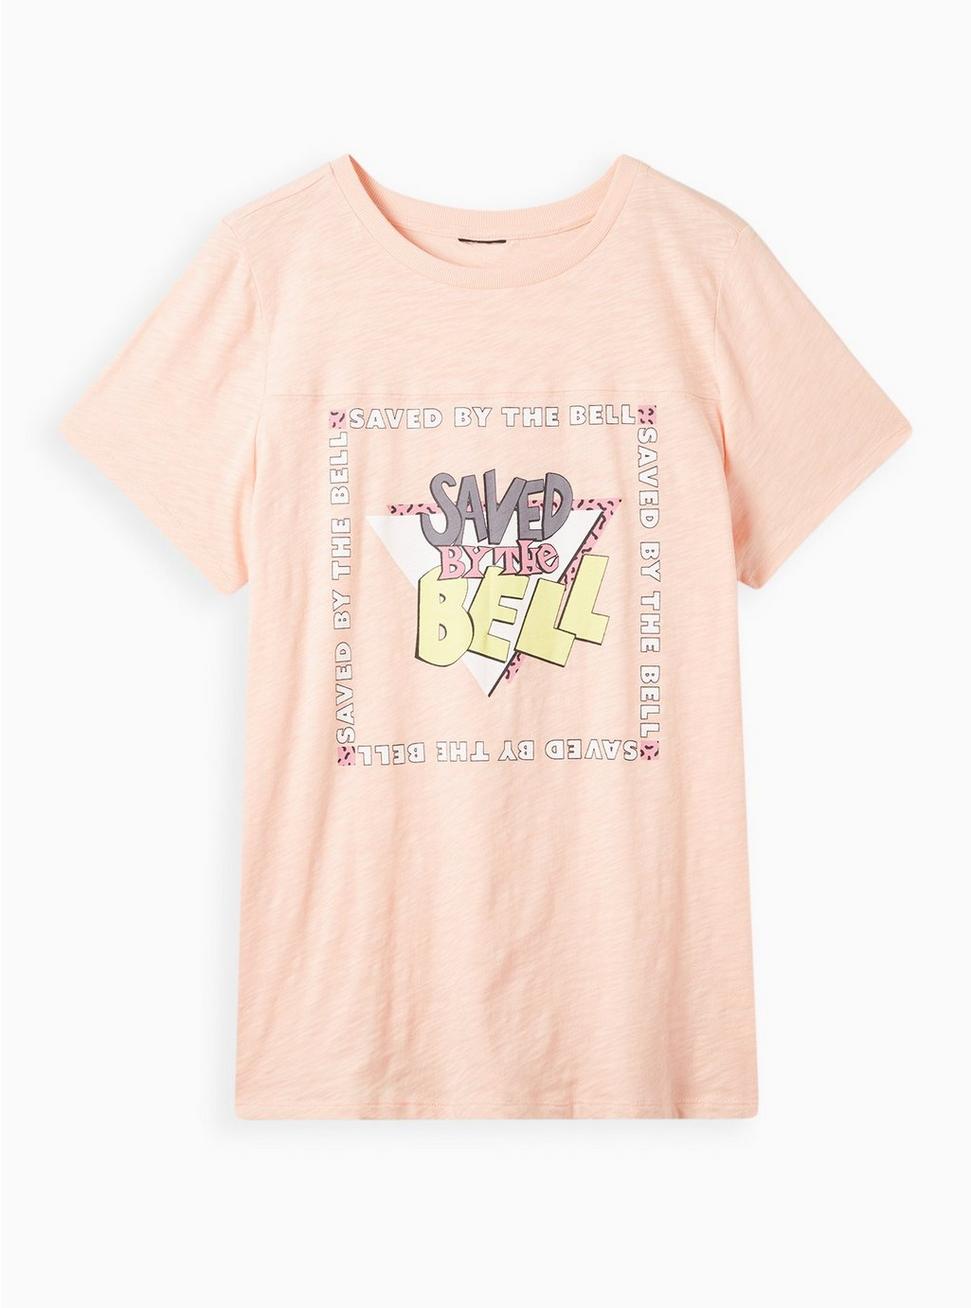 Plus Size Universal Saved By The Bell Classic Crew Top - Cotton Peach, GREY, hi-res